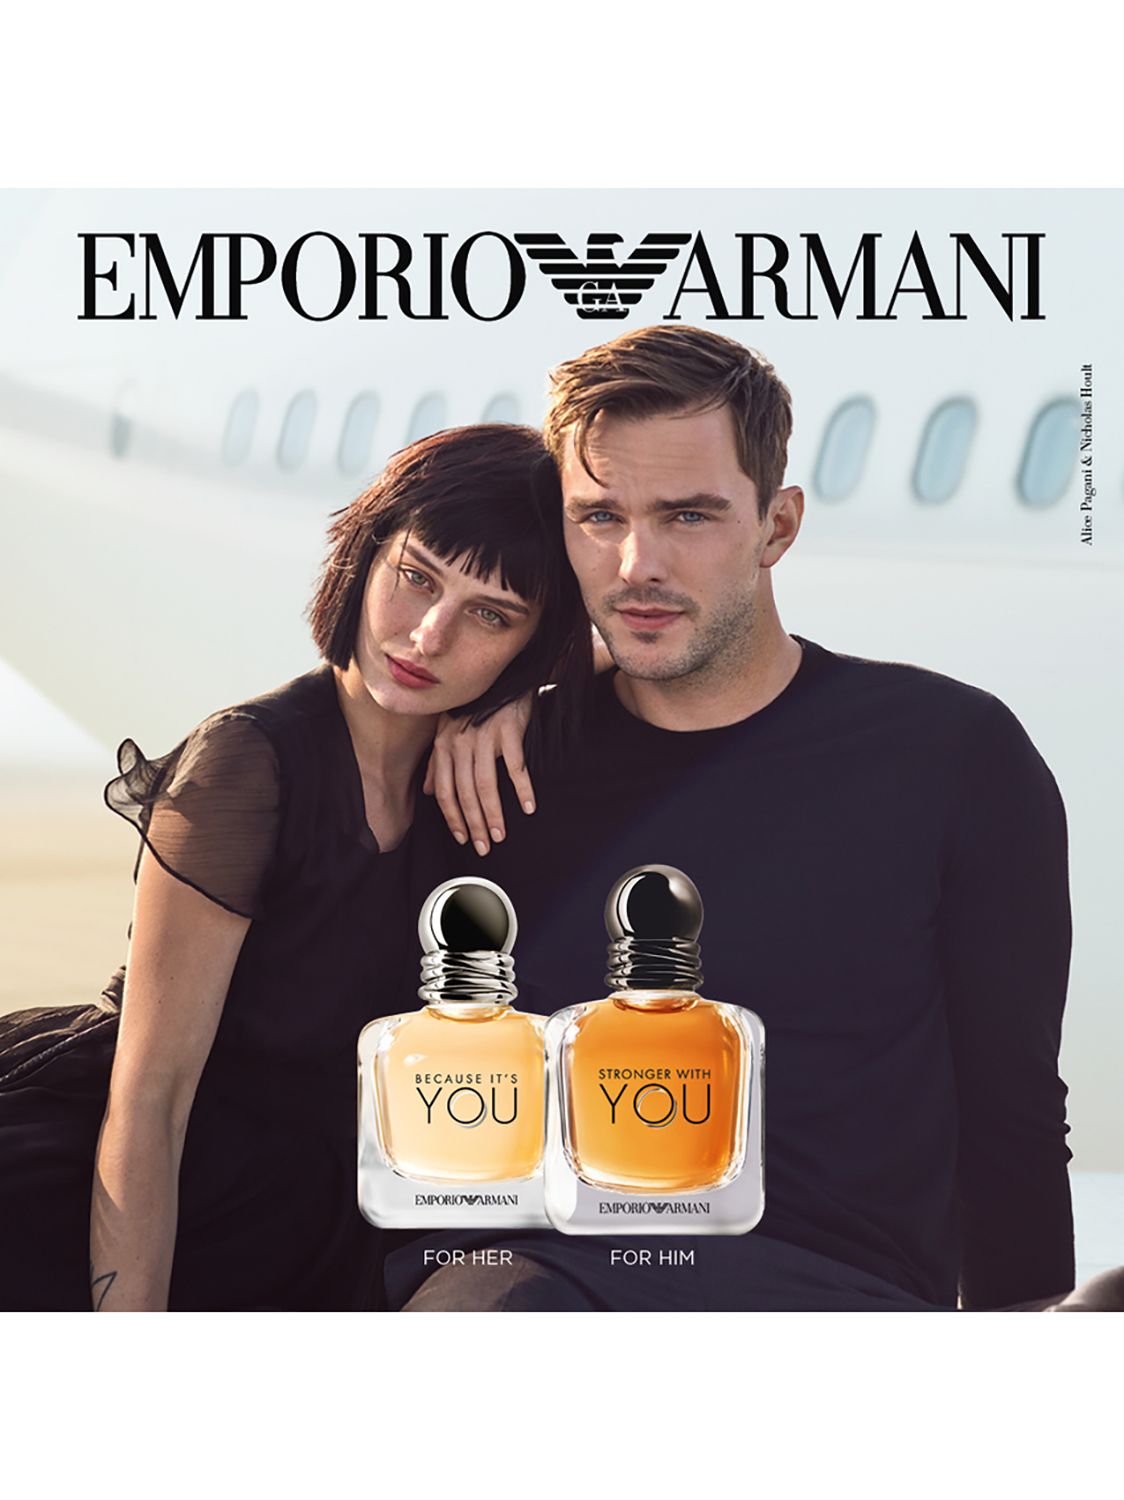 because it's you by emporio armani